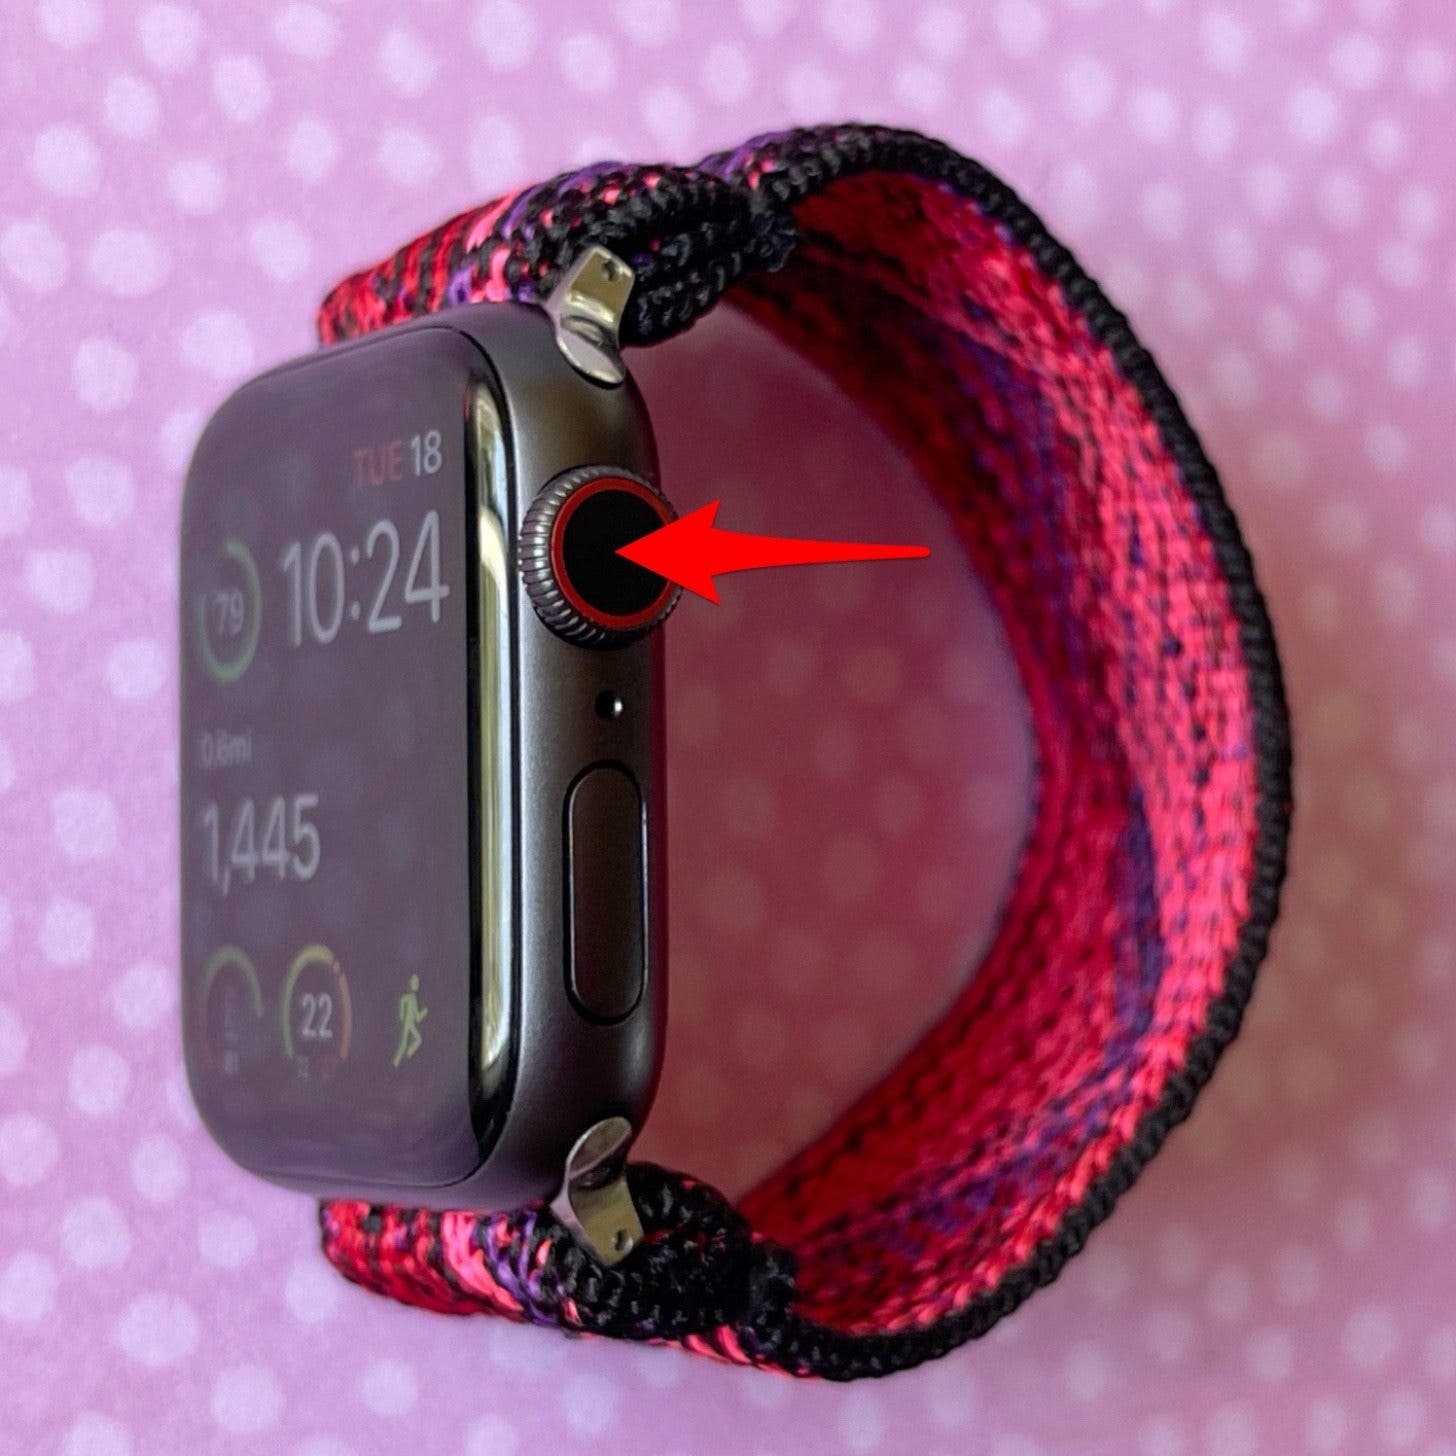 Press the Home button - how to change fitness goals on apple watch